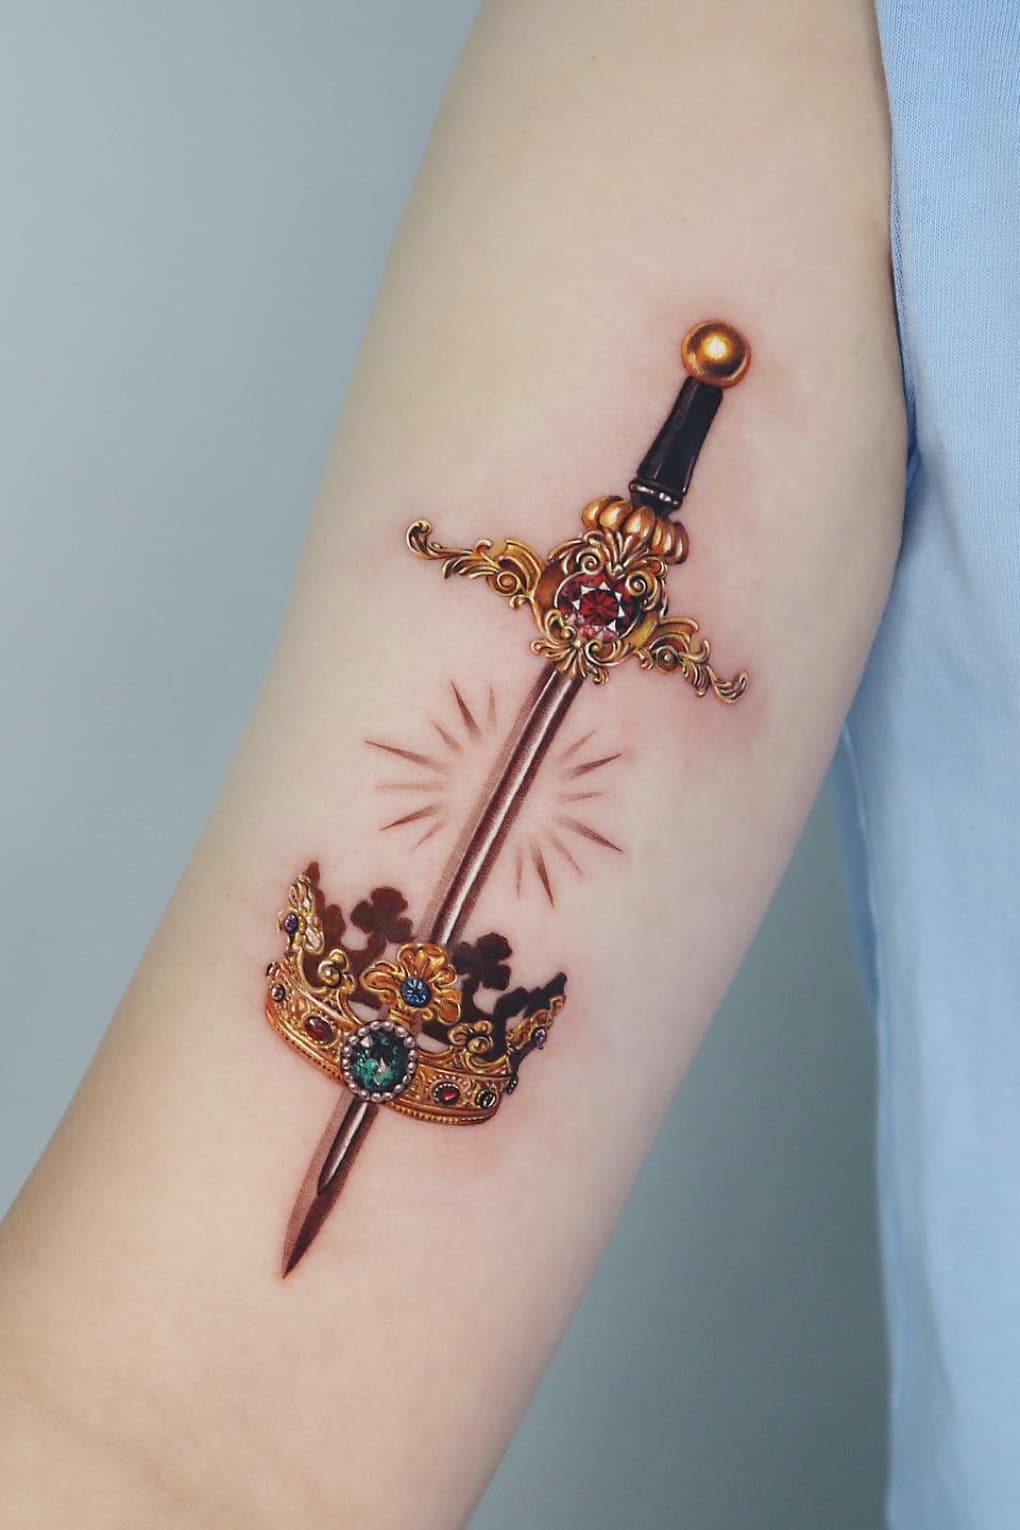 Crown and Sword Tattoo